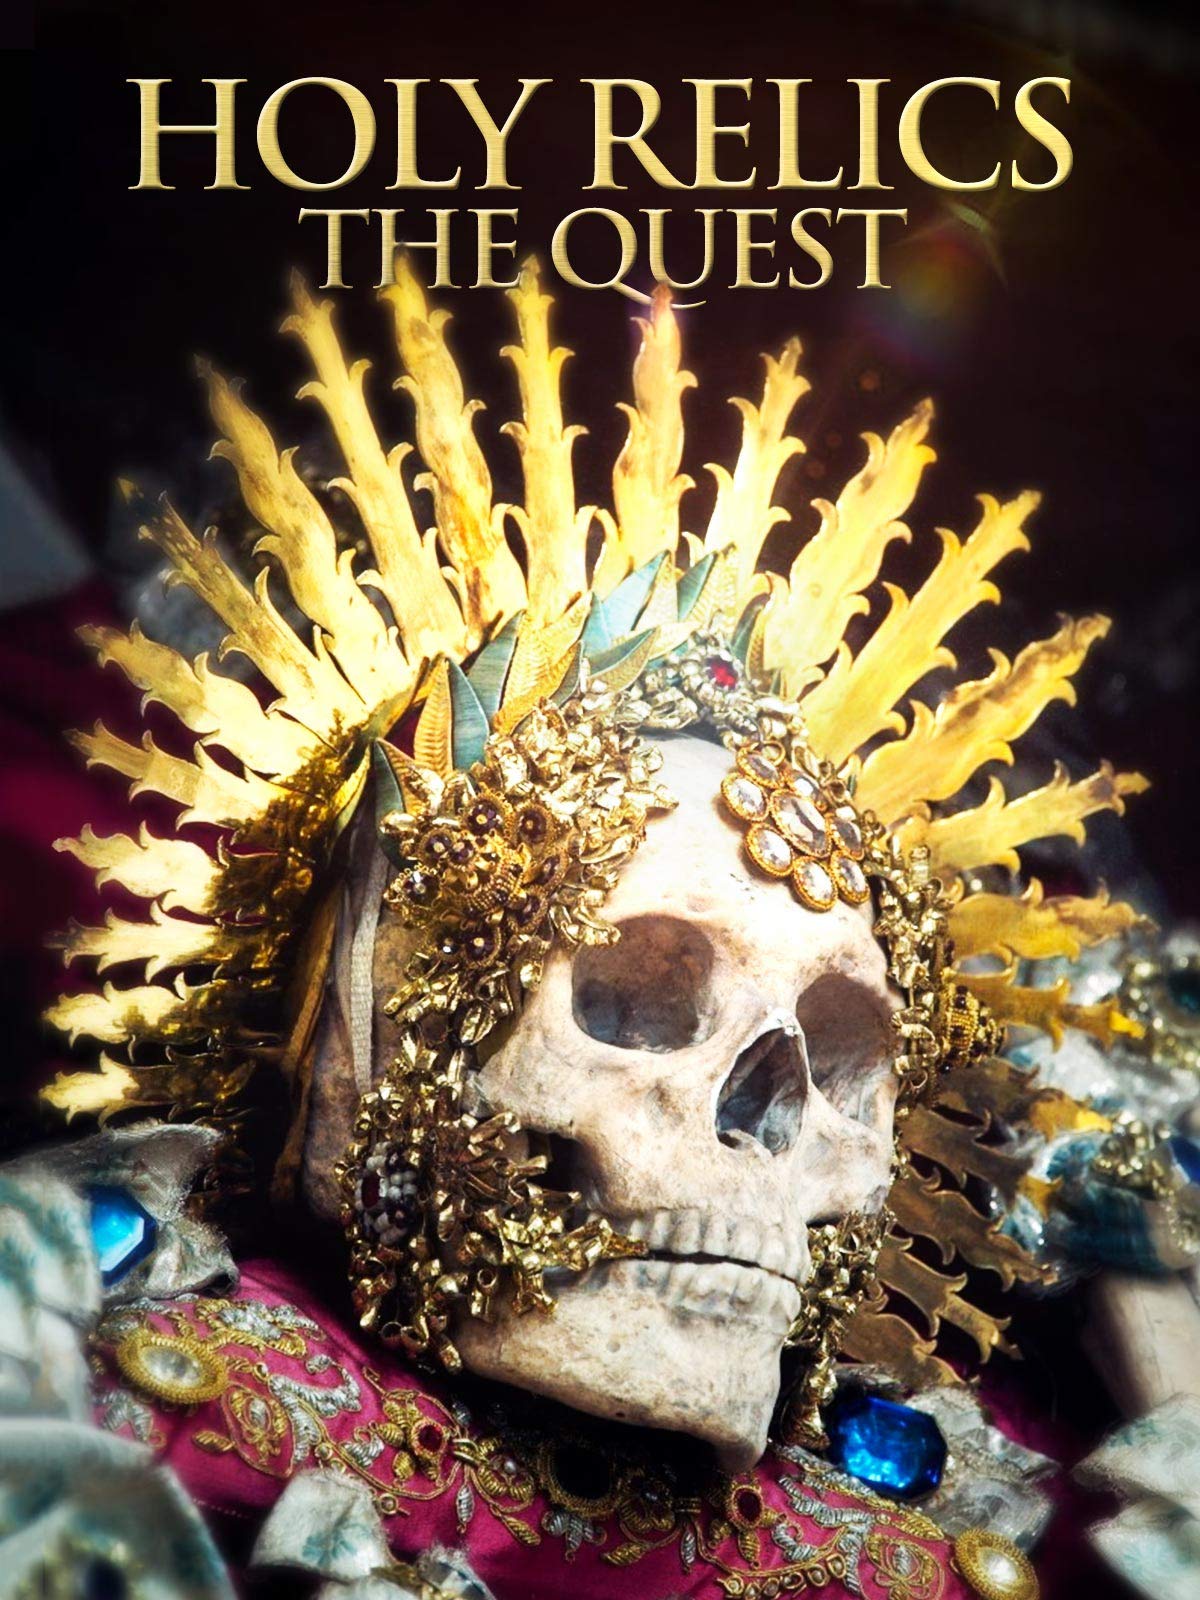 The Holy Relics: The Quest